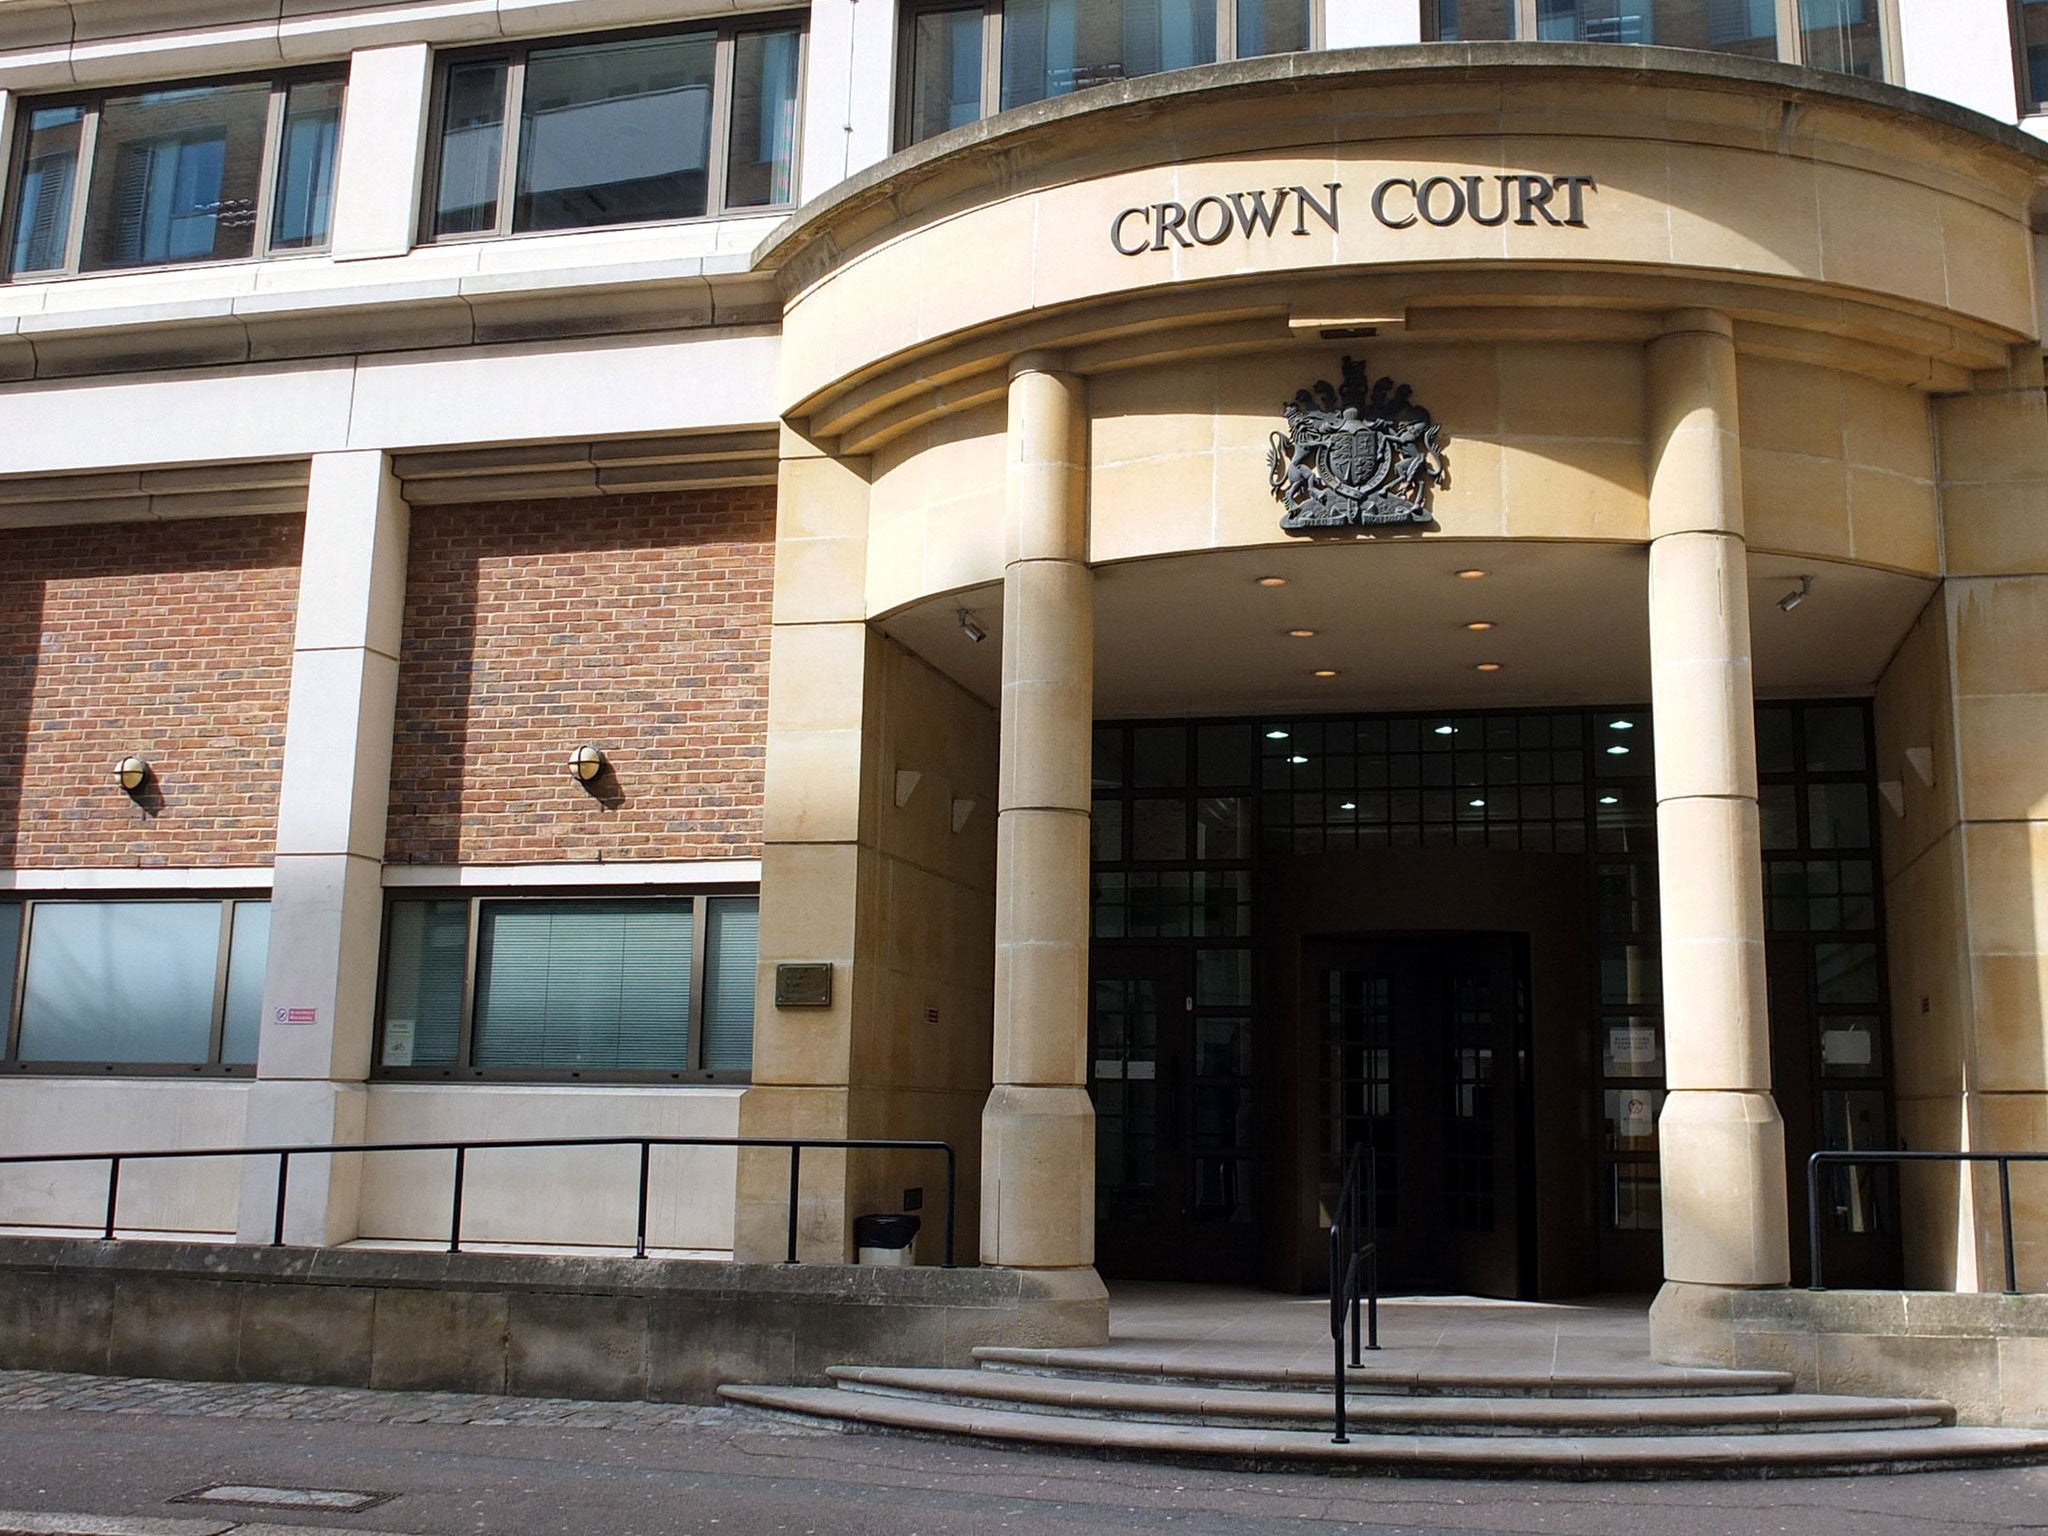 The man was sentenced to six and a half years in prison in a hearing at Blackfriars Crown Court